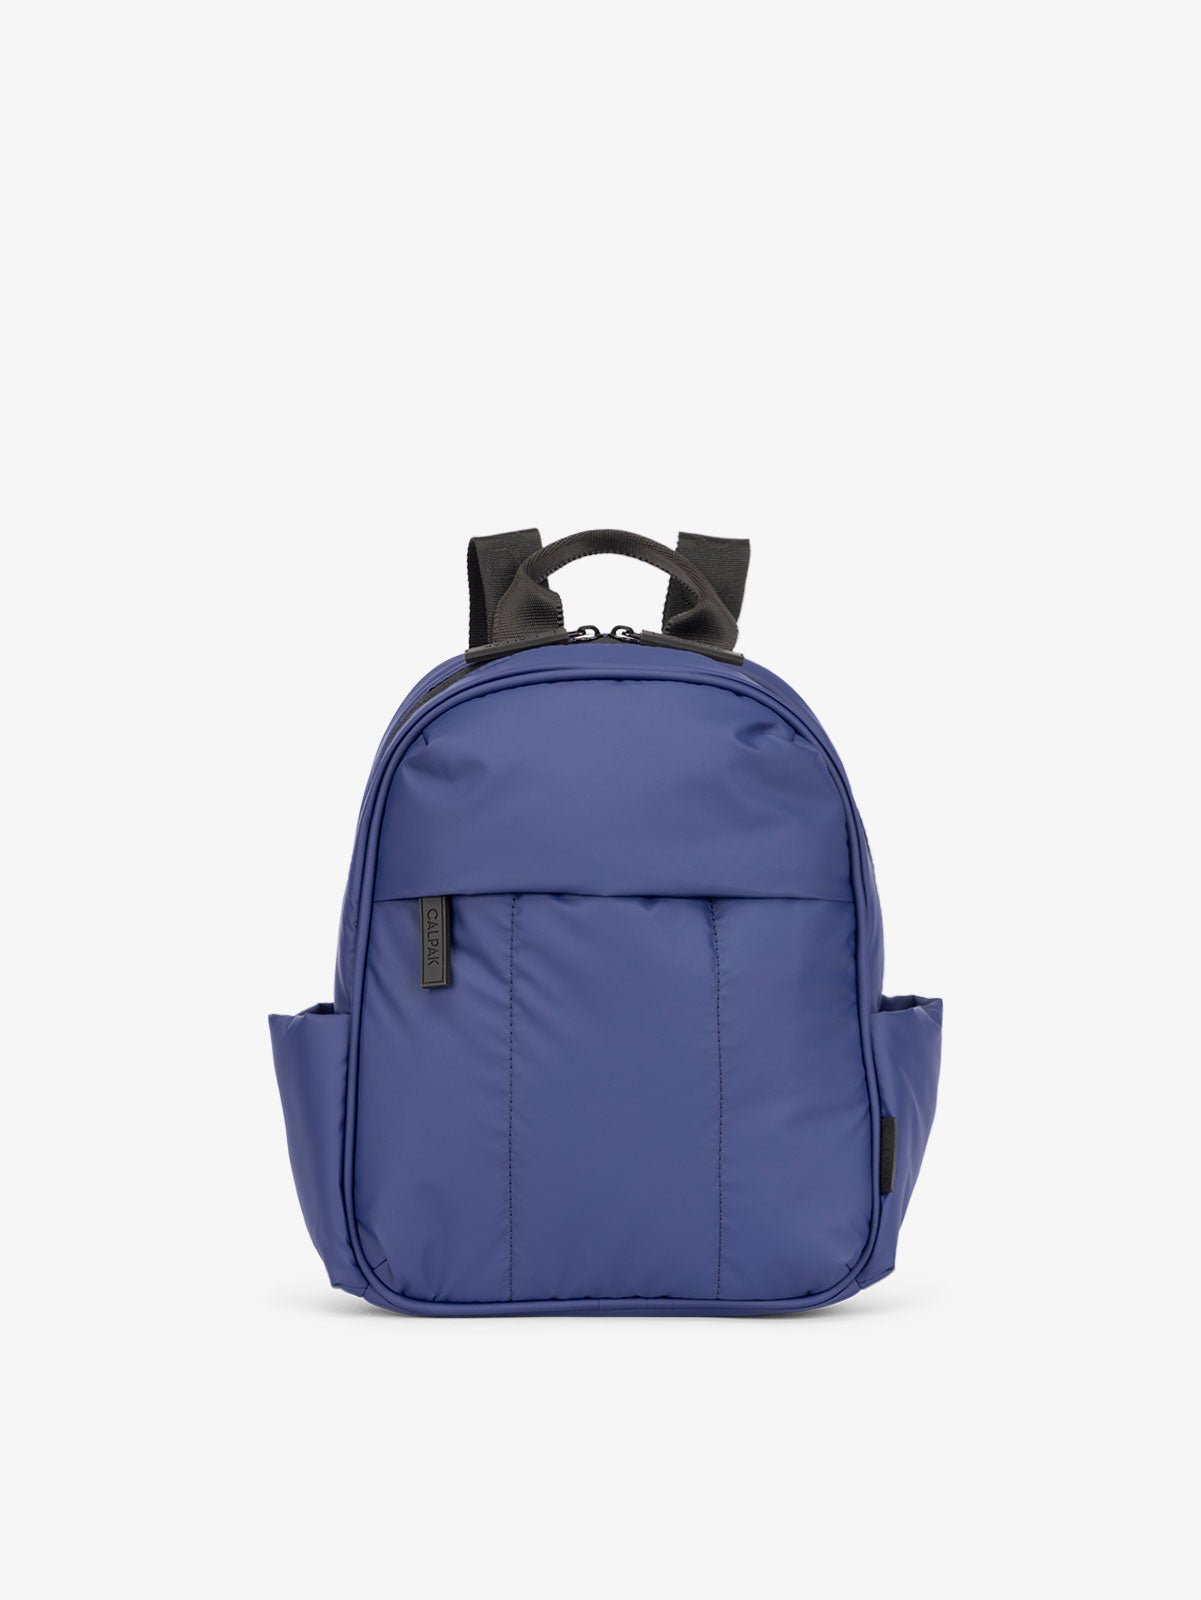 CALPAK Luka Mini Backpack with soft puffy exterior and front zippered pocket in navy blue